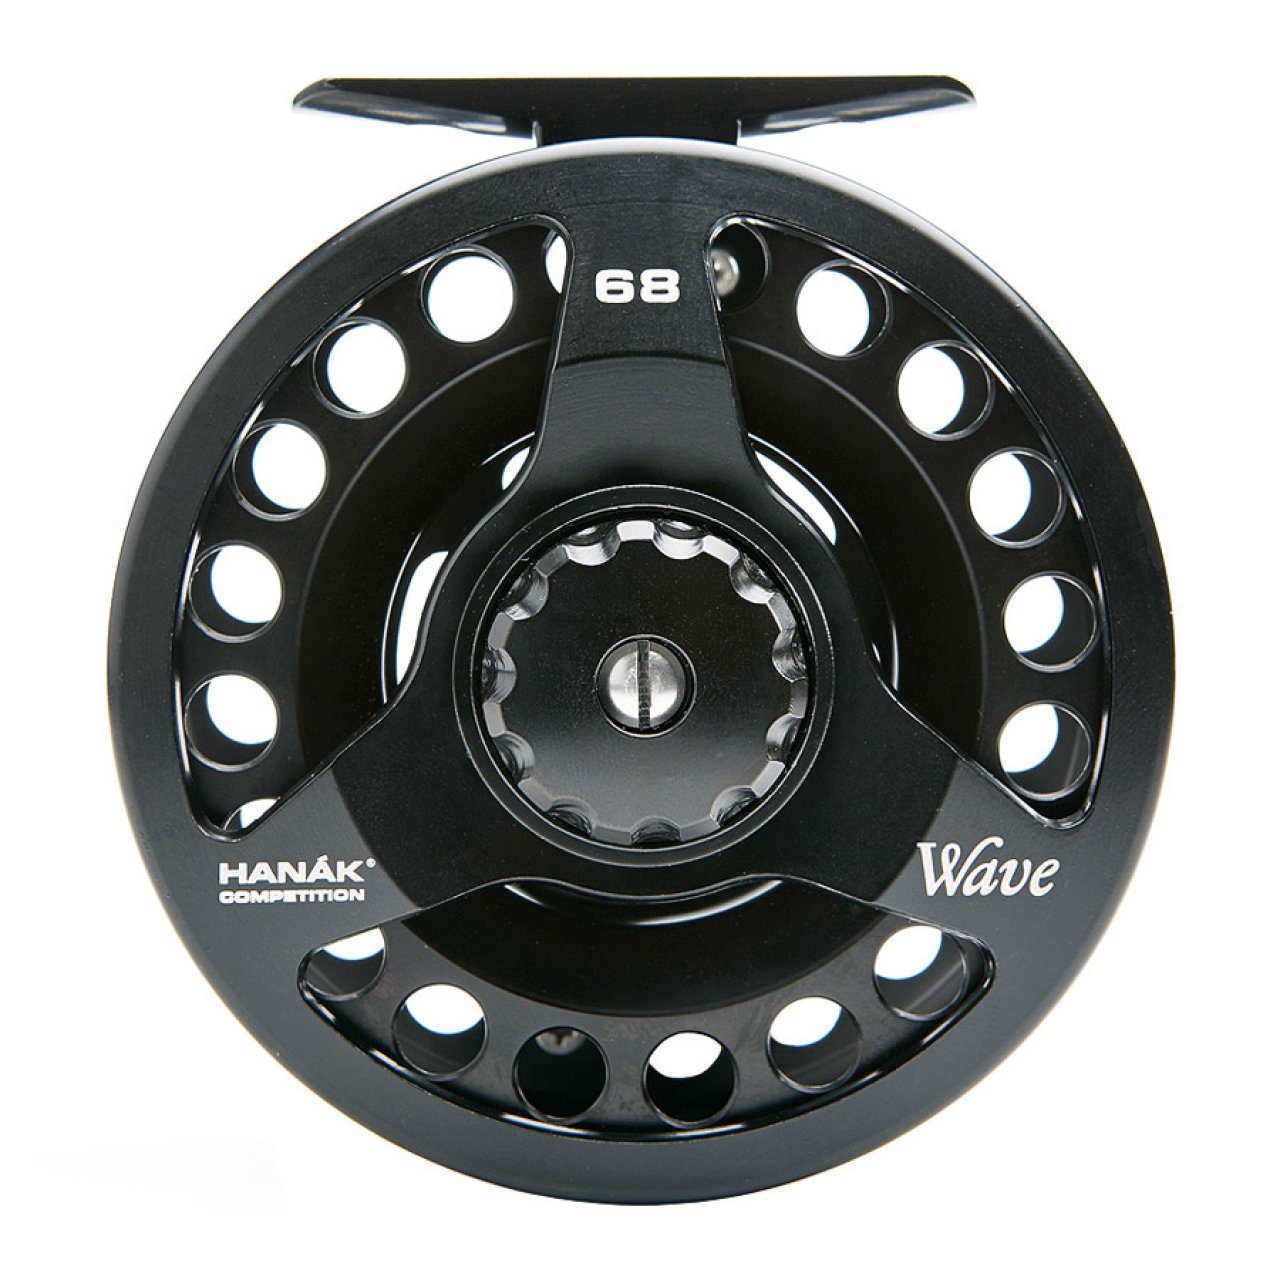 HANAK WAVE FLY REEL 2/4 4/5 6/8 AND 7/9 WEIGHT QUALITY DRAG BALL-BEARING 